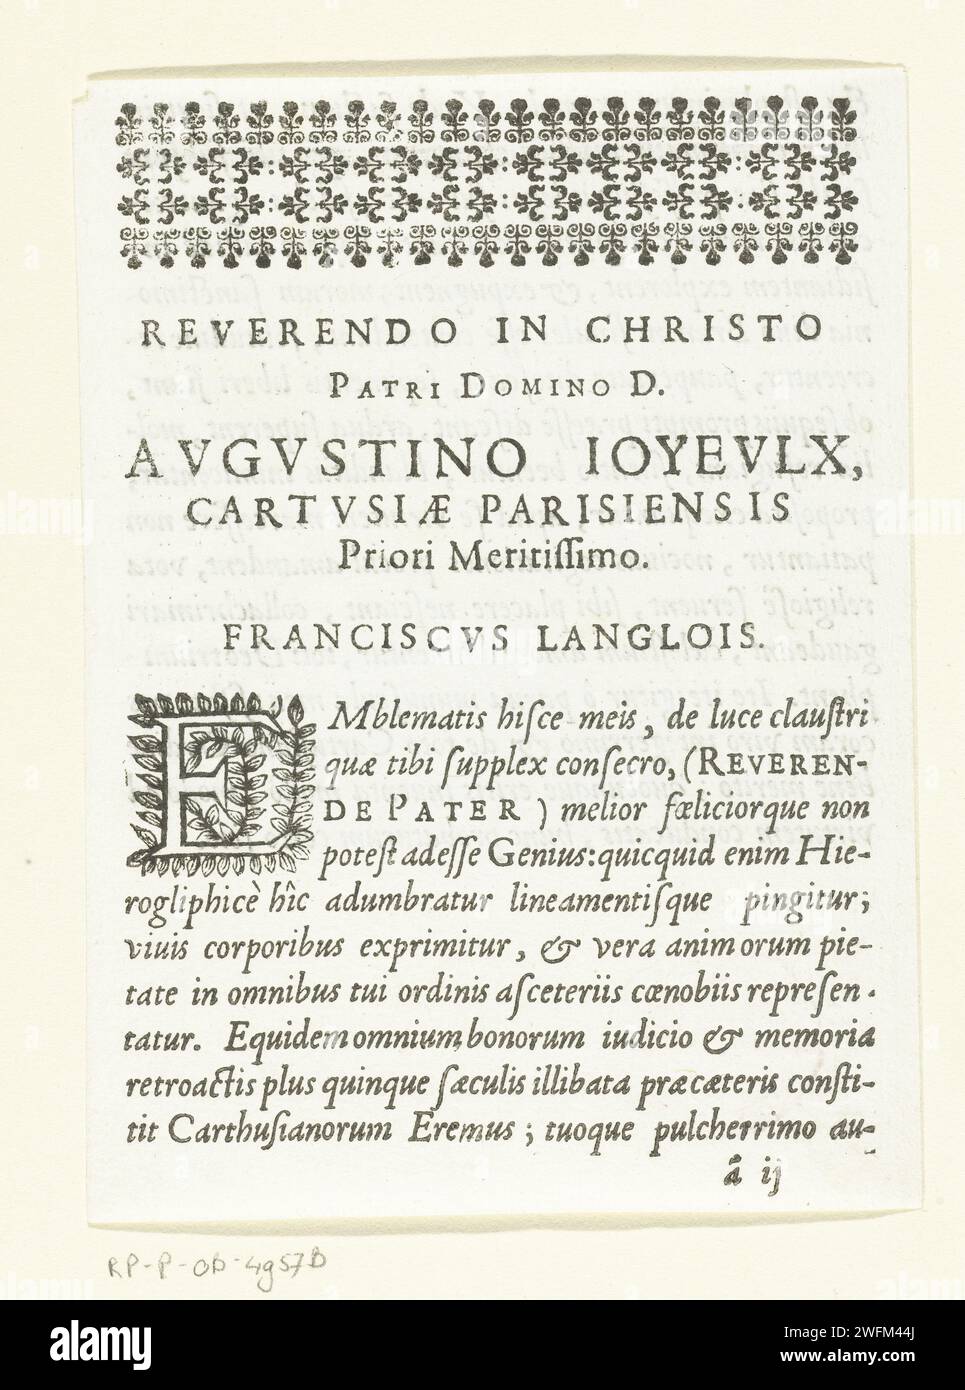 Unit -Lustrated assignment at the emblem series 'Monastic Life in Emblemen', 1646 text sheet Latin text in book print. This magazine (printed on both sides) contains the assignment to a certain clergyman of the second state of the emblem series 'Monastic Life in Emblemen', which, in addition to an univided title page and this unit -traded magazine with assignment, also includes an illustrated title page and 26 emblems. publisher: Parisprint maker: Nancy paper letterpress printing Stock Photo